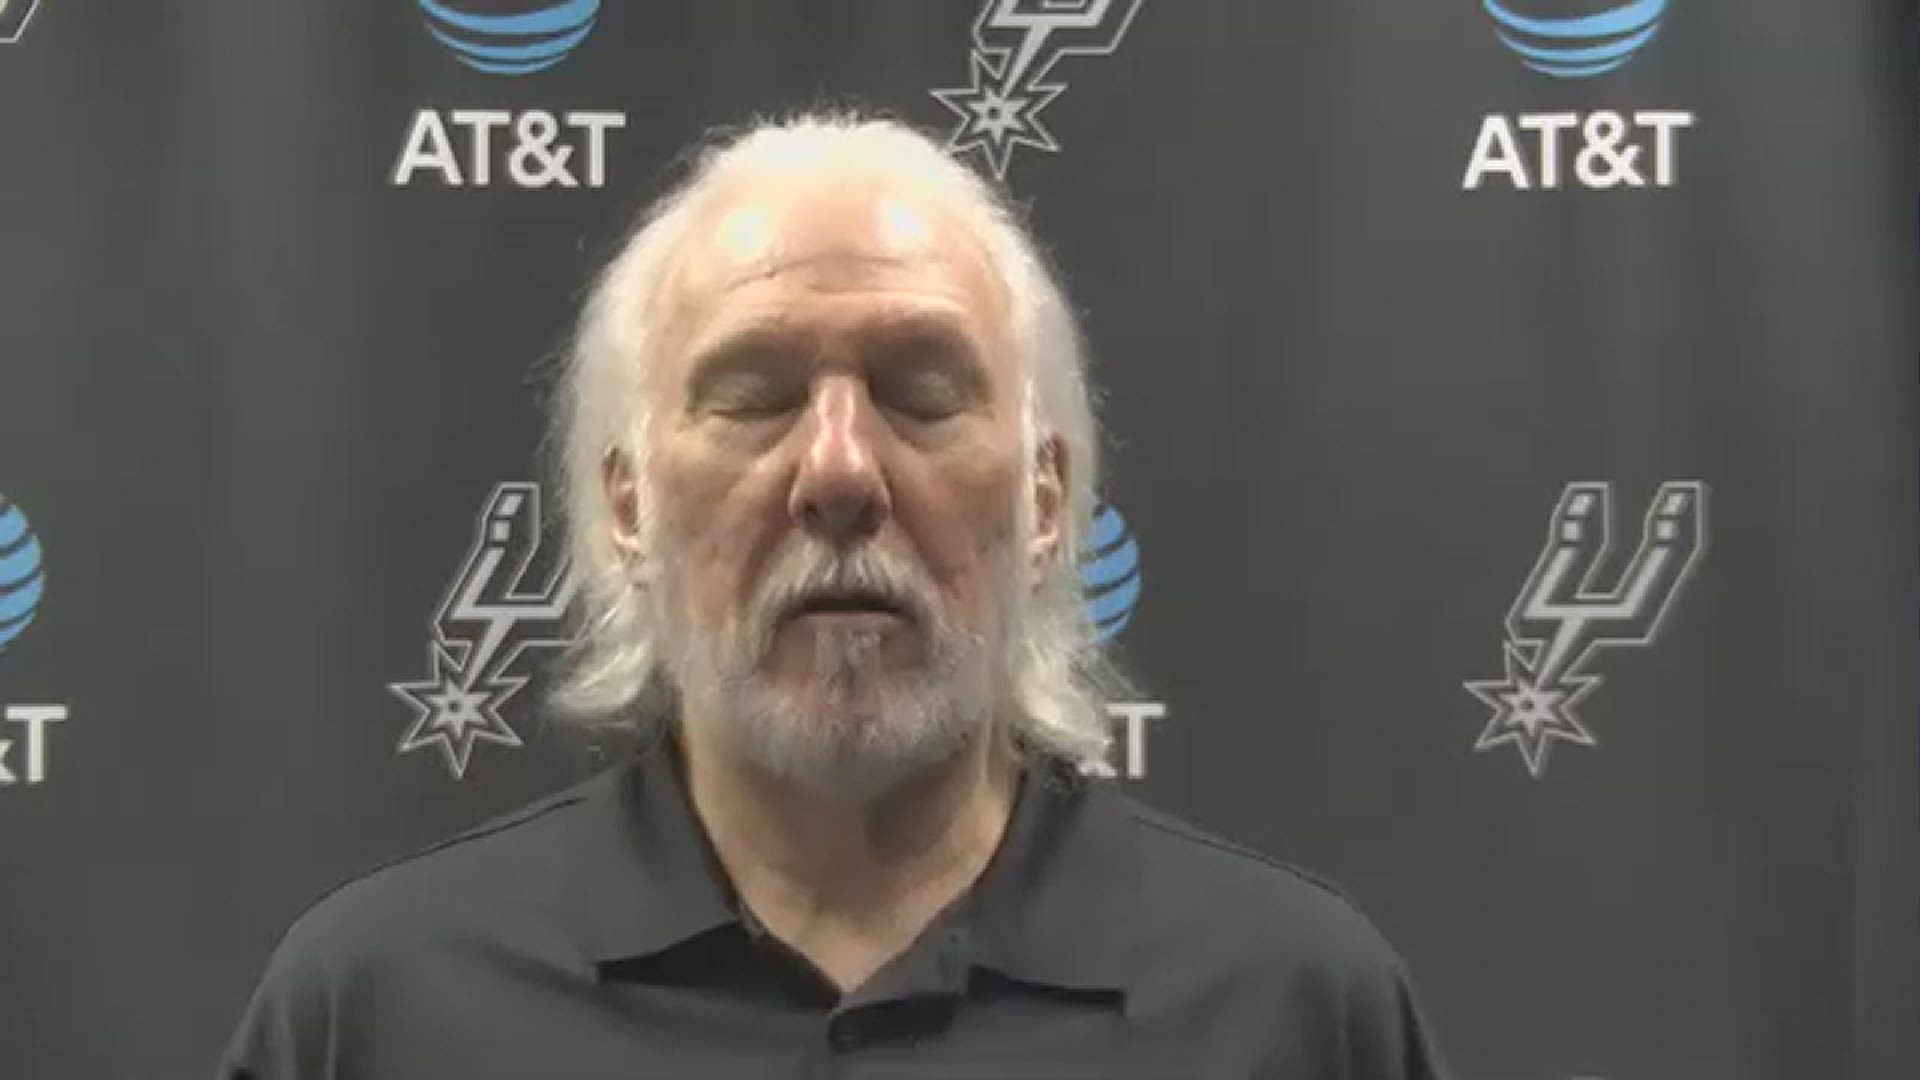 Pop spoke about the last five games as a chance for the young players to develop, and talked about the way Bryn Forbes has developed.